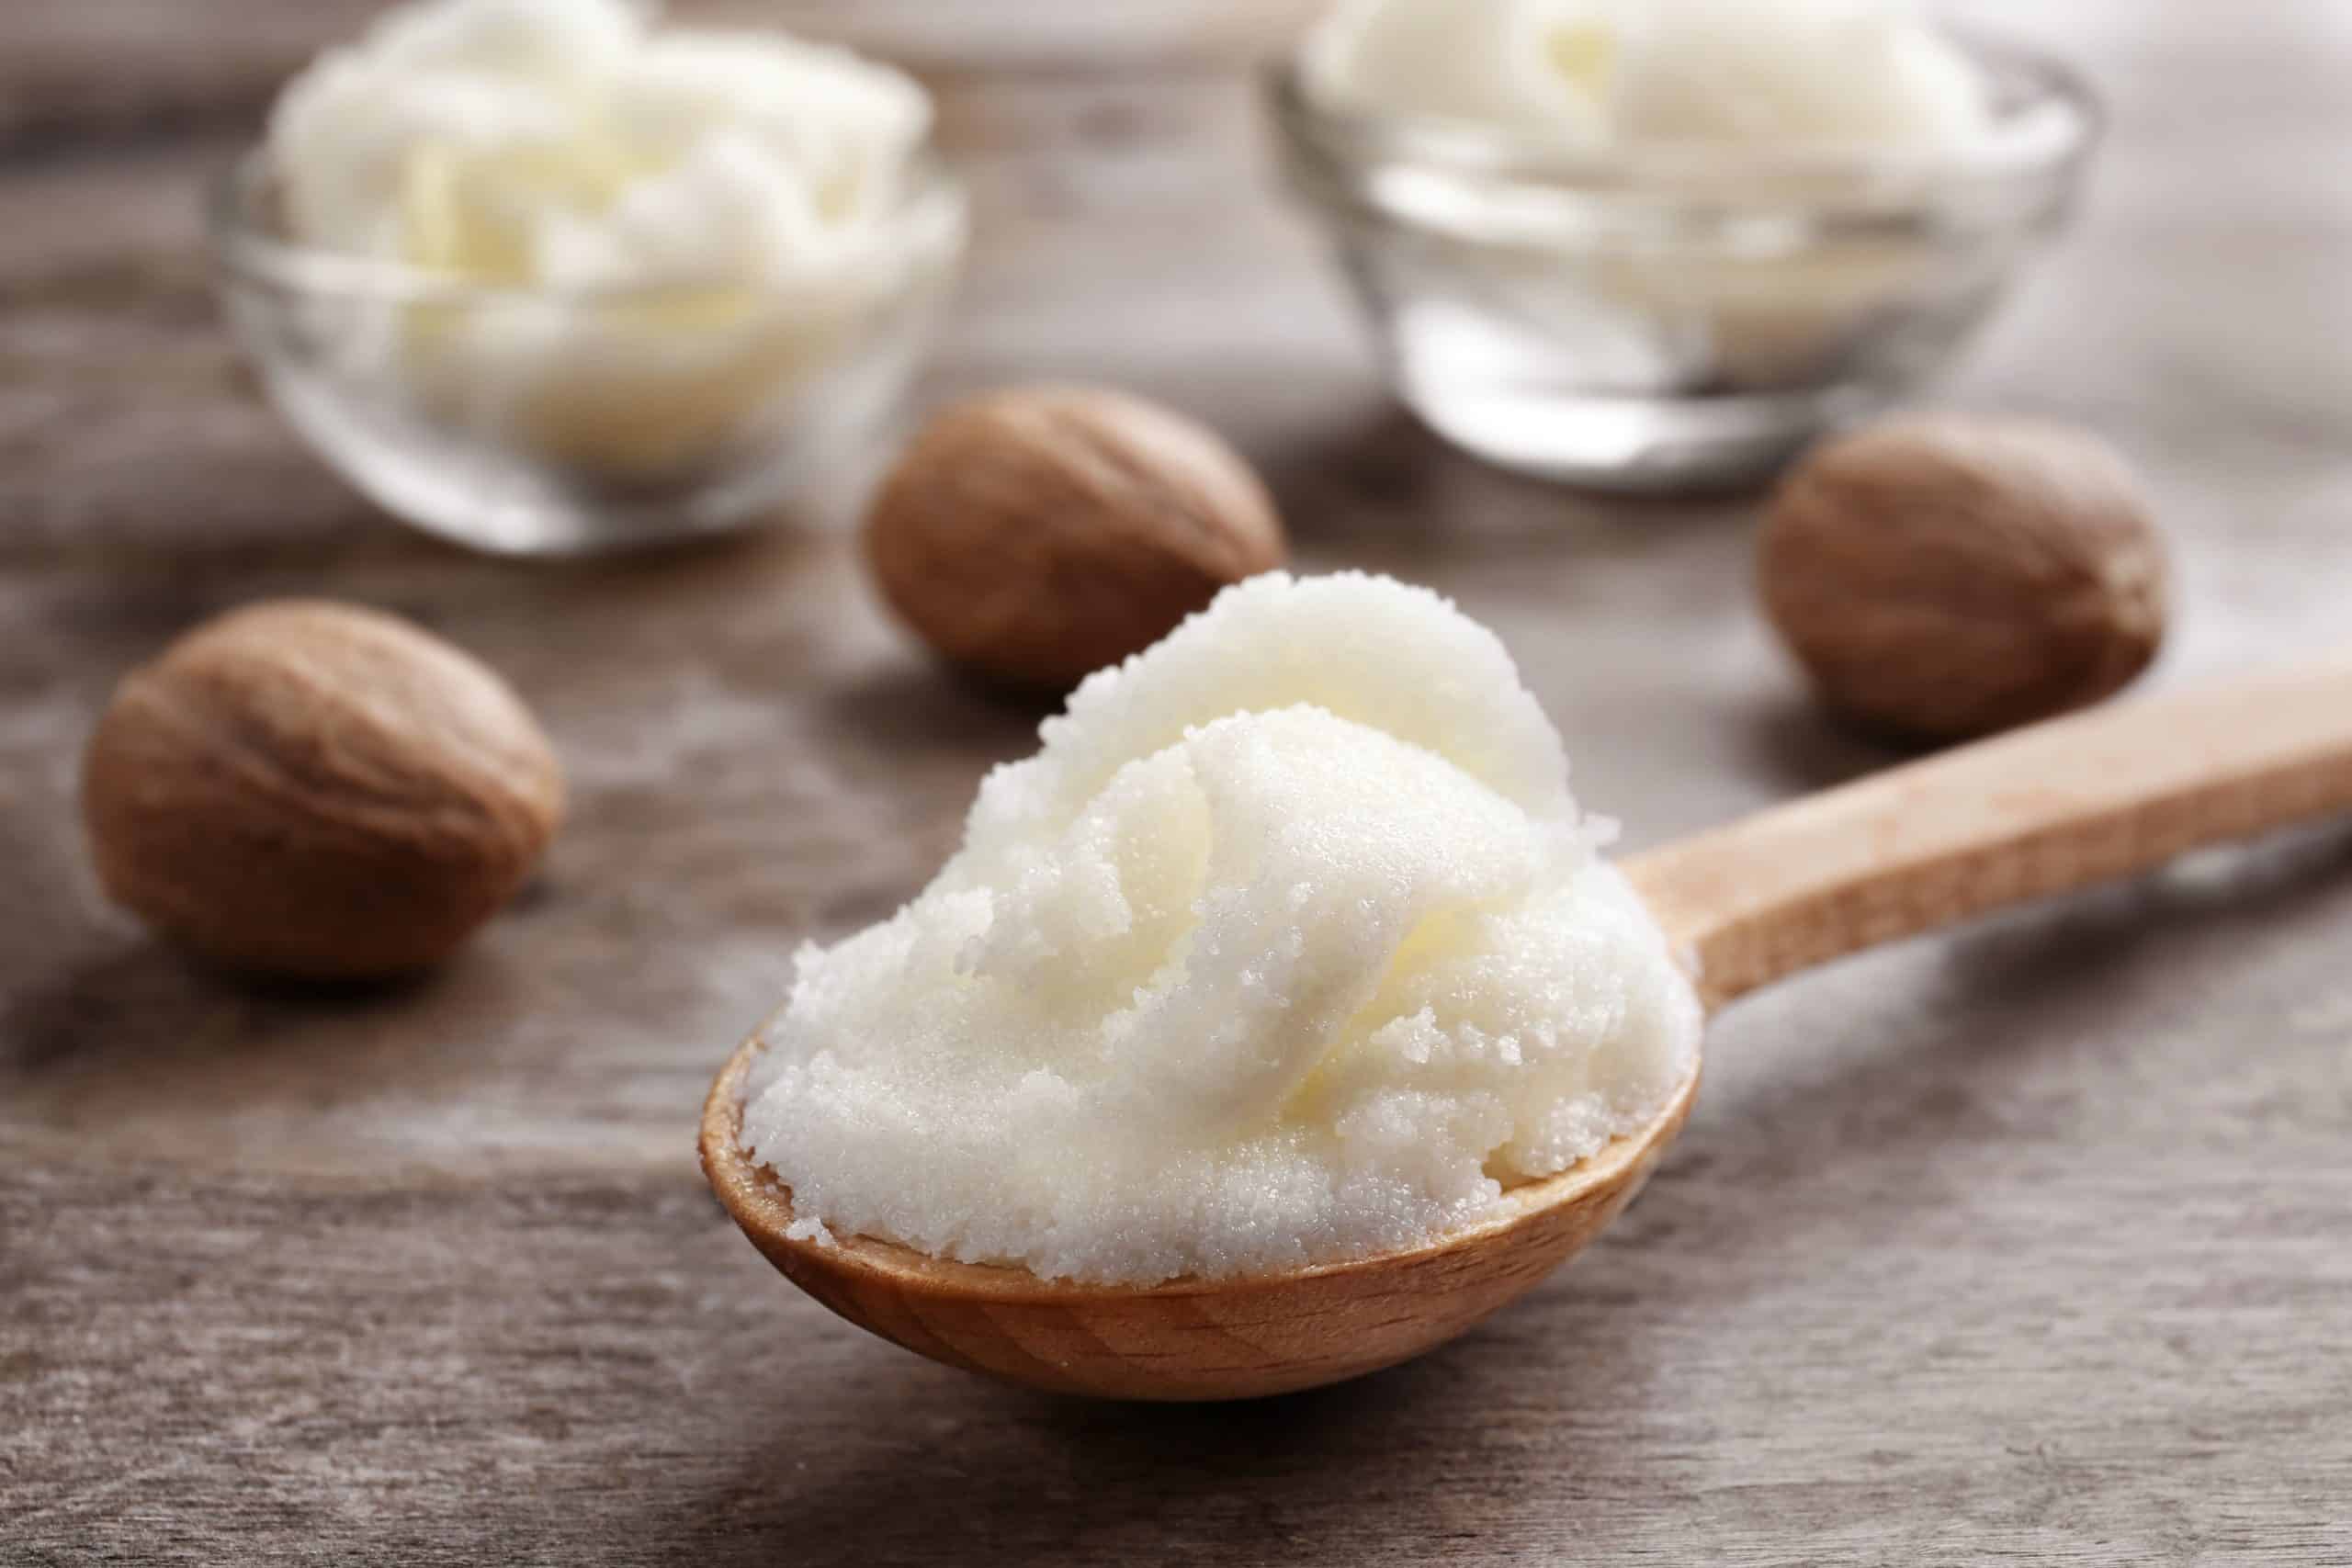 The perfect cosmetic for summer? Reach for shea butter